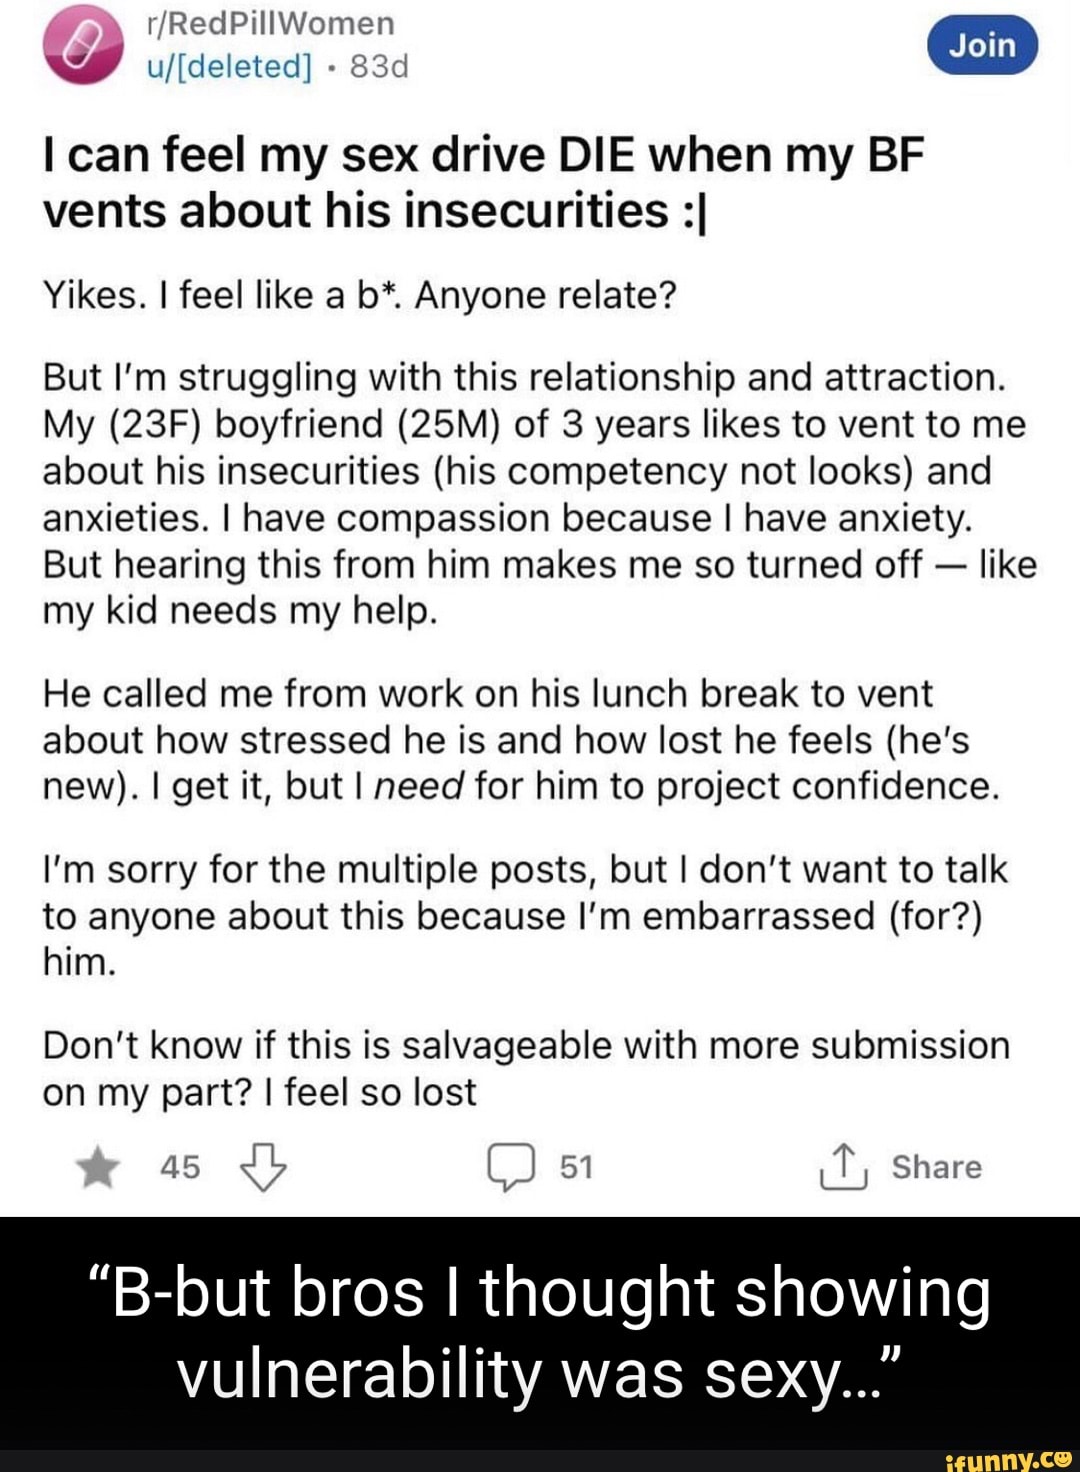 Redpillwomen Can Feel My Sex Drive Die When My Bf Vents About His Insecurities I Yikes I